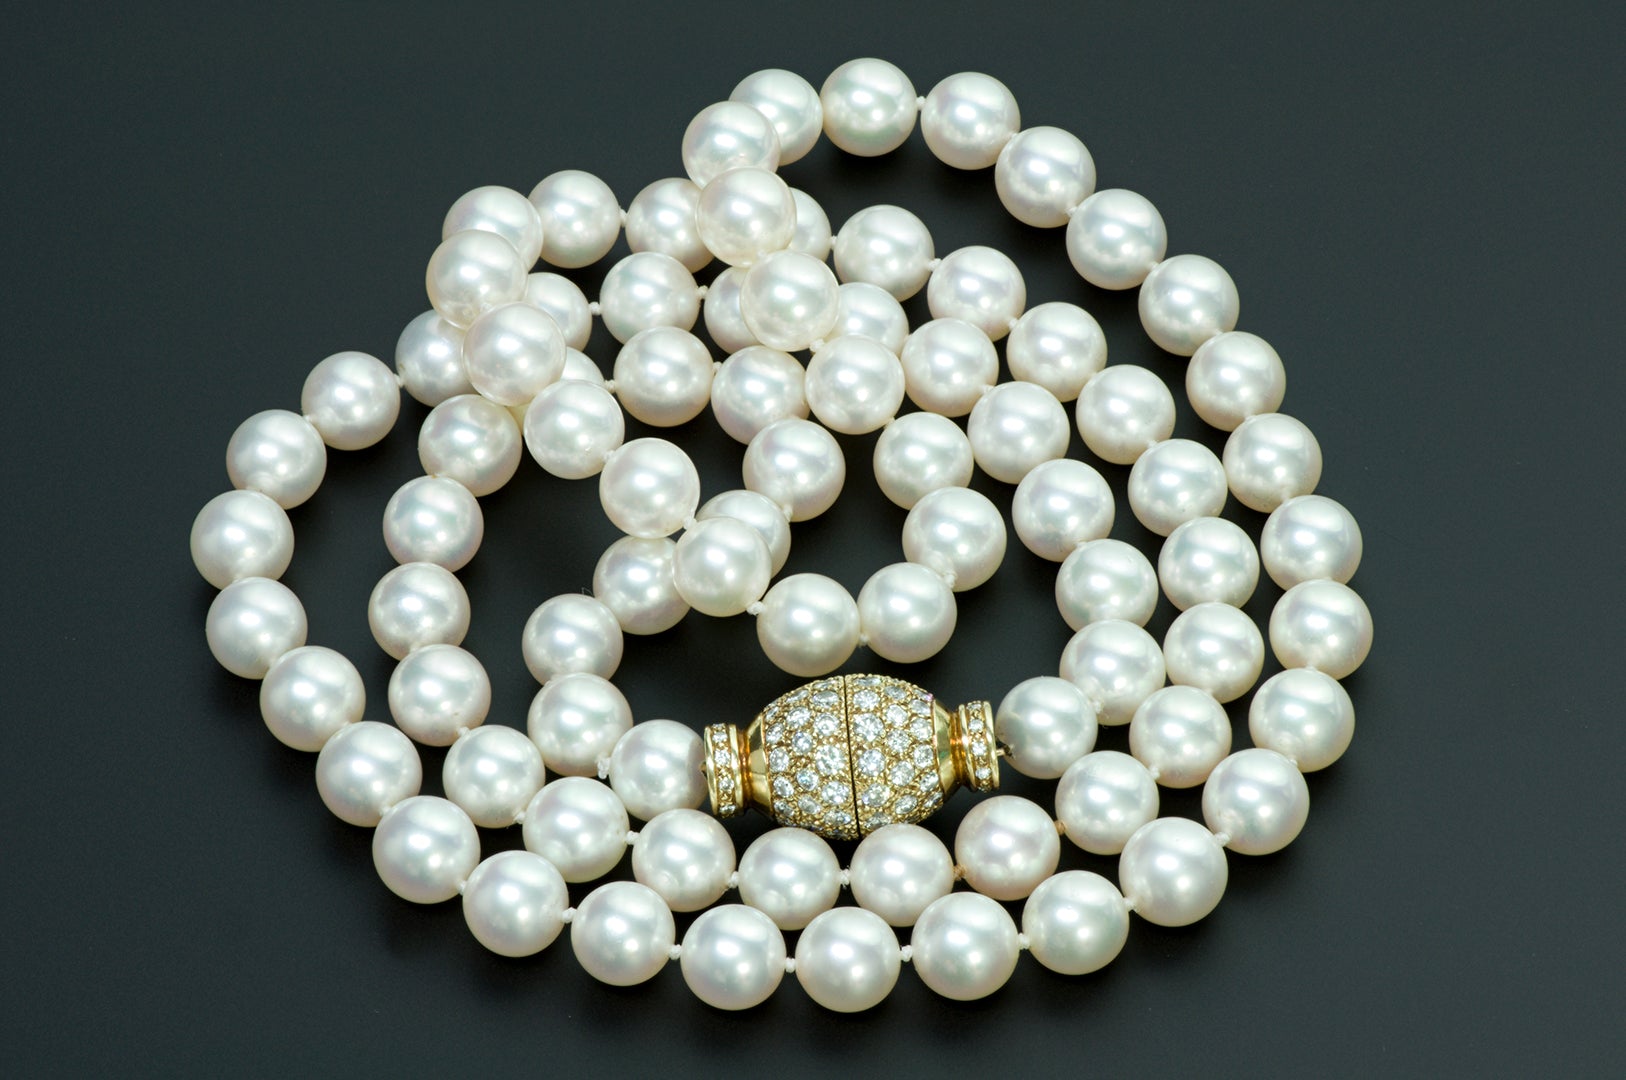 Pearls - Not Only Jewelry But Also Dietary Supplements - DSF Antique Jewelry